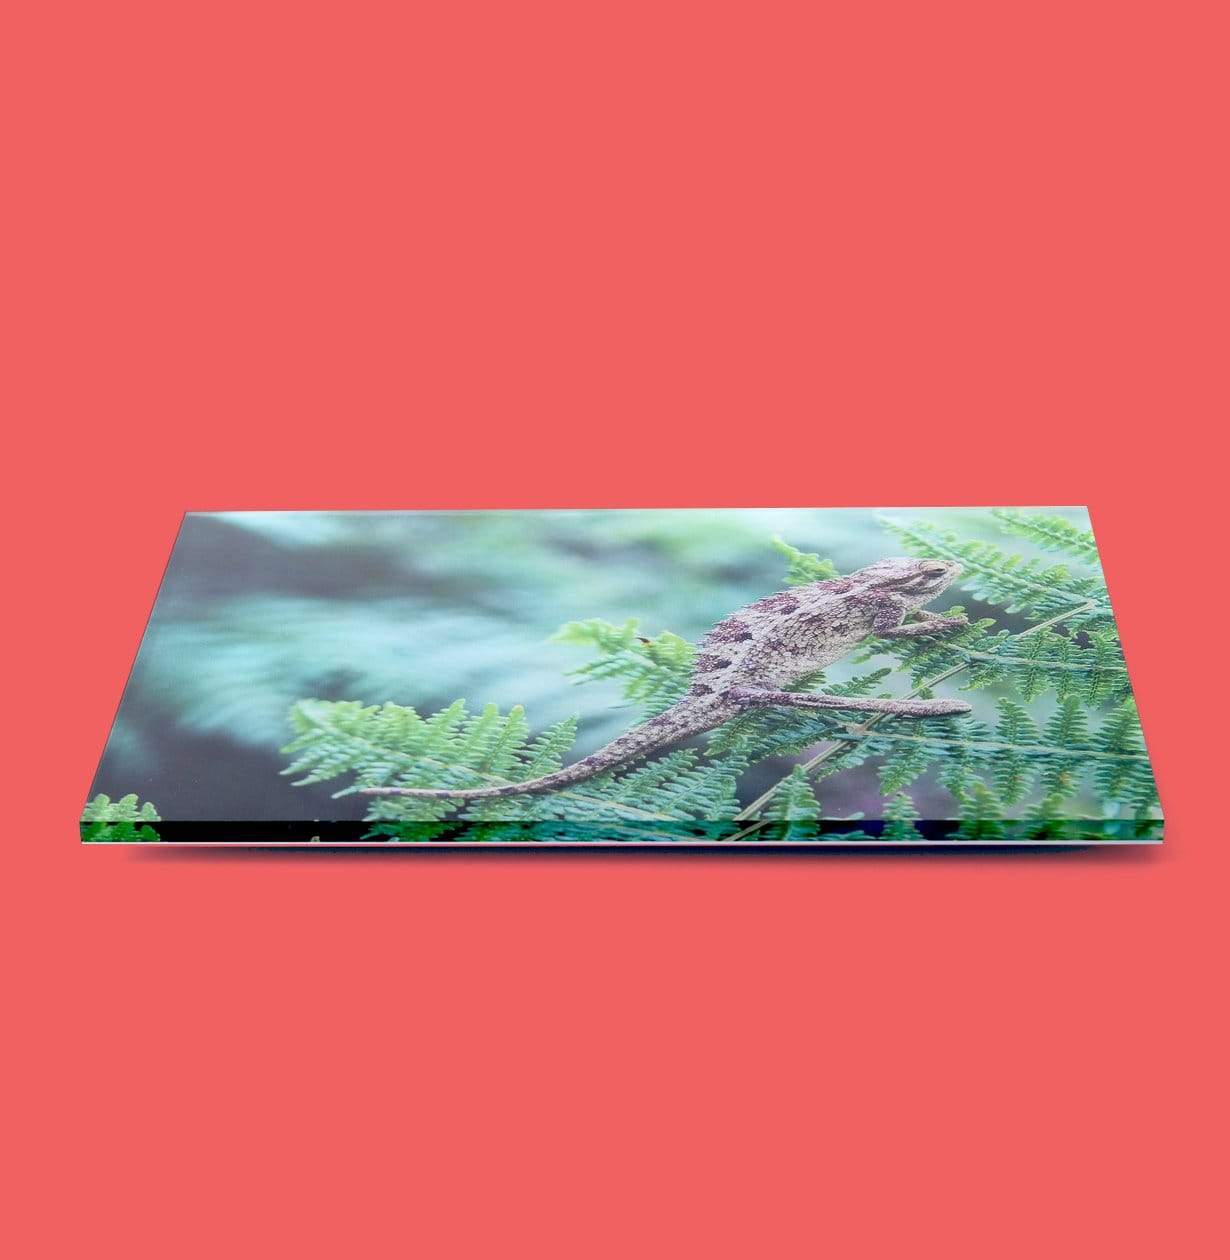 Side-View of Acrylic Photo Print